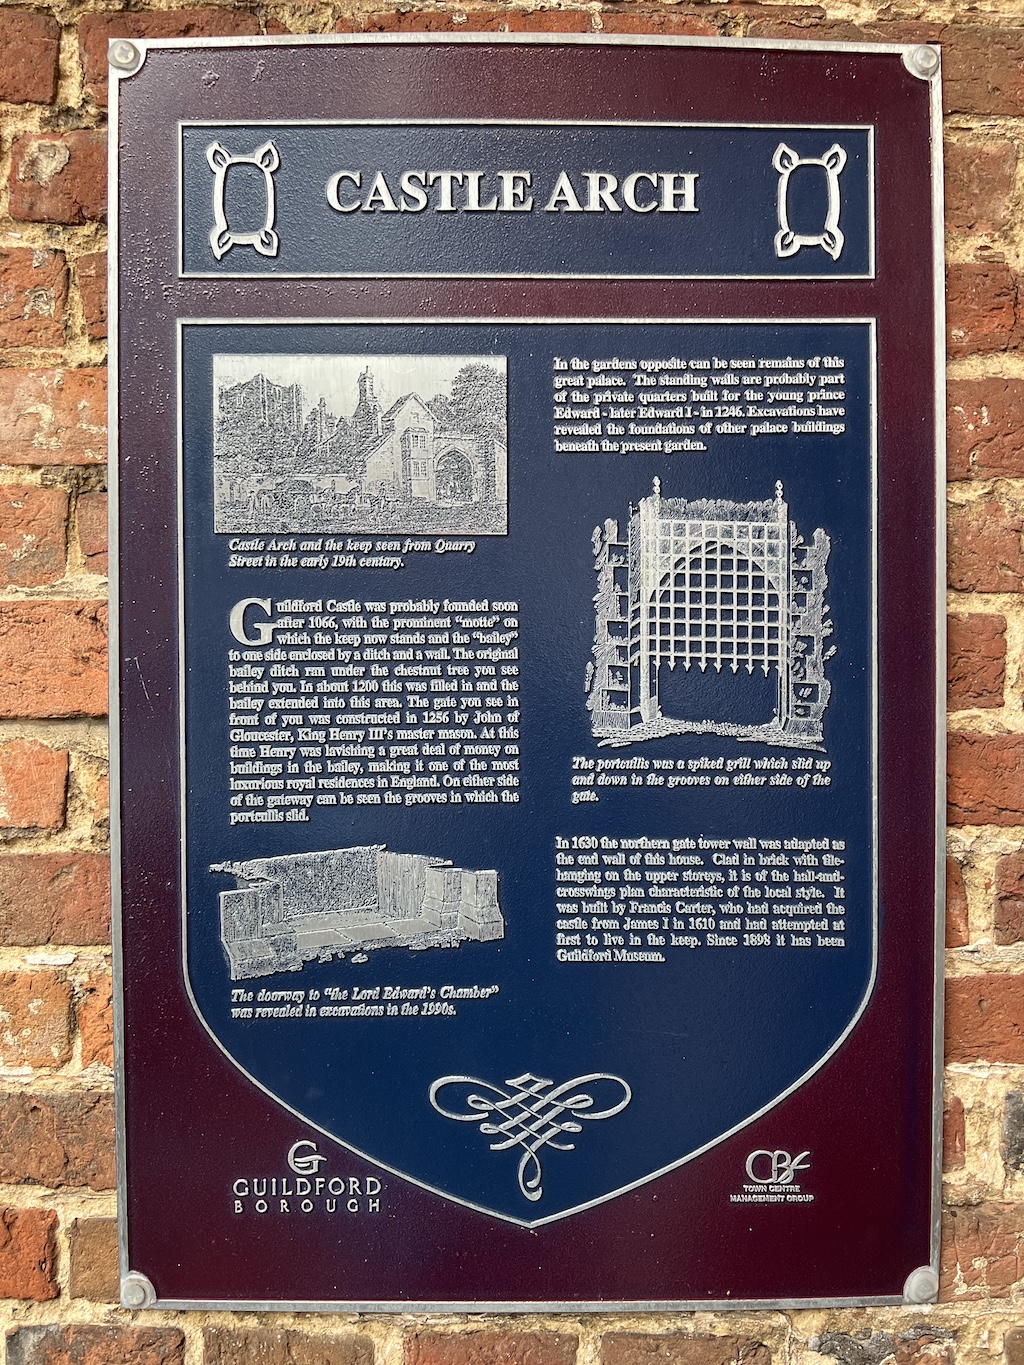 Blue plaque in Guildford for Castle Arch